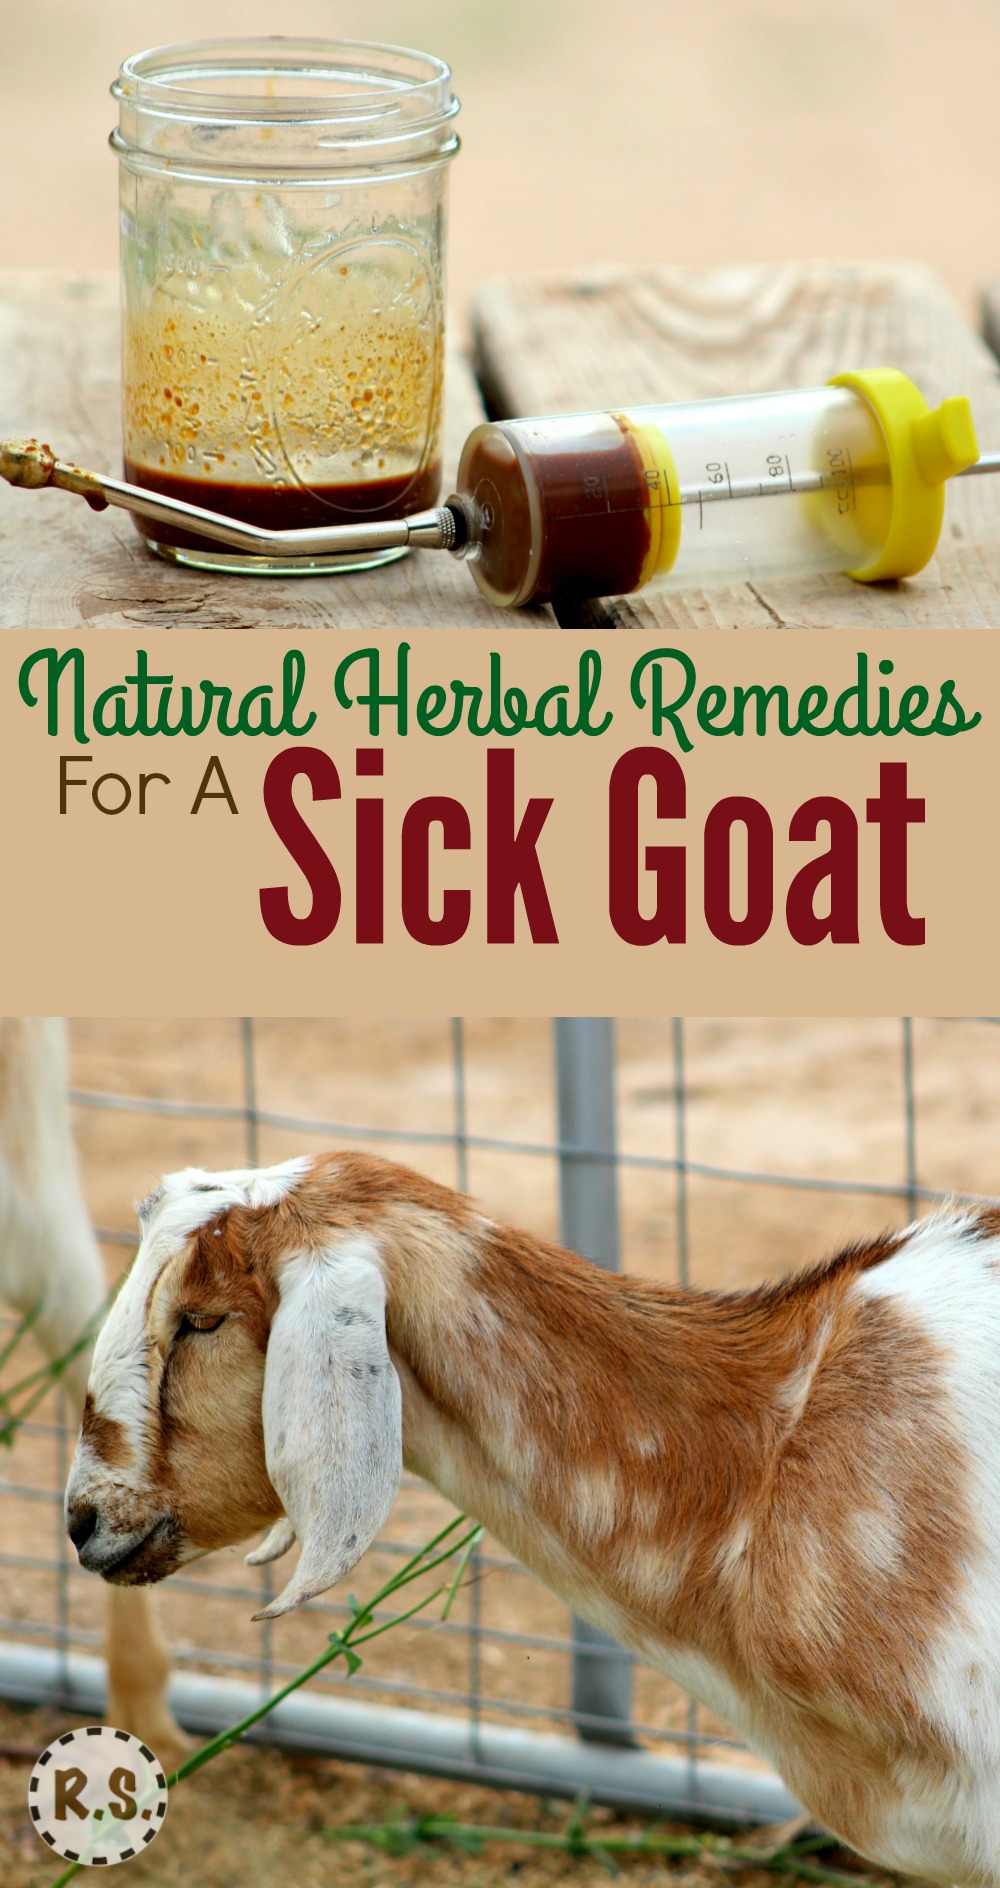 Learn how to treat a sick goat with this natural remedy. It is easy to make at home. When your goat is sick, try this DIY herbal recipe for natural goat care.